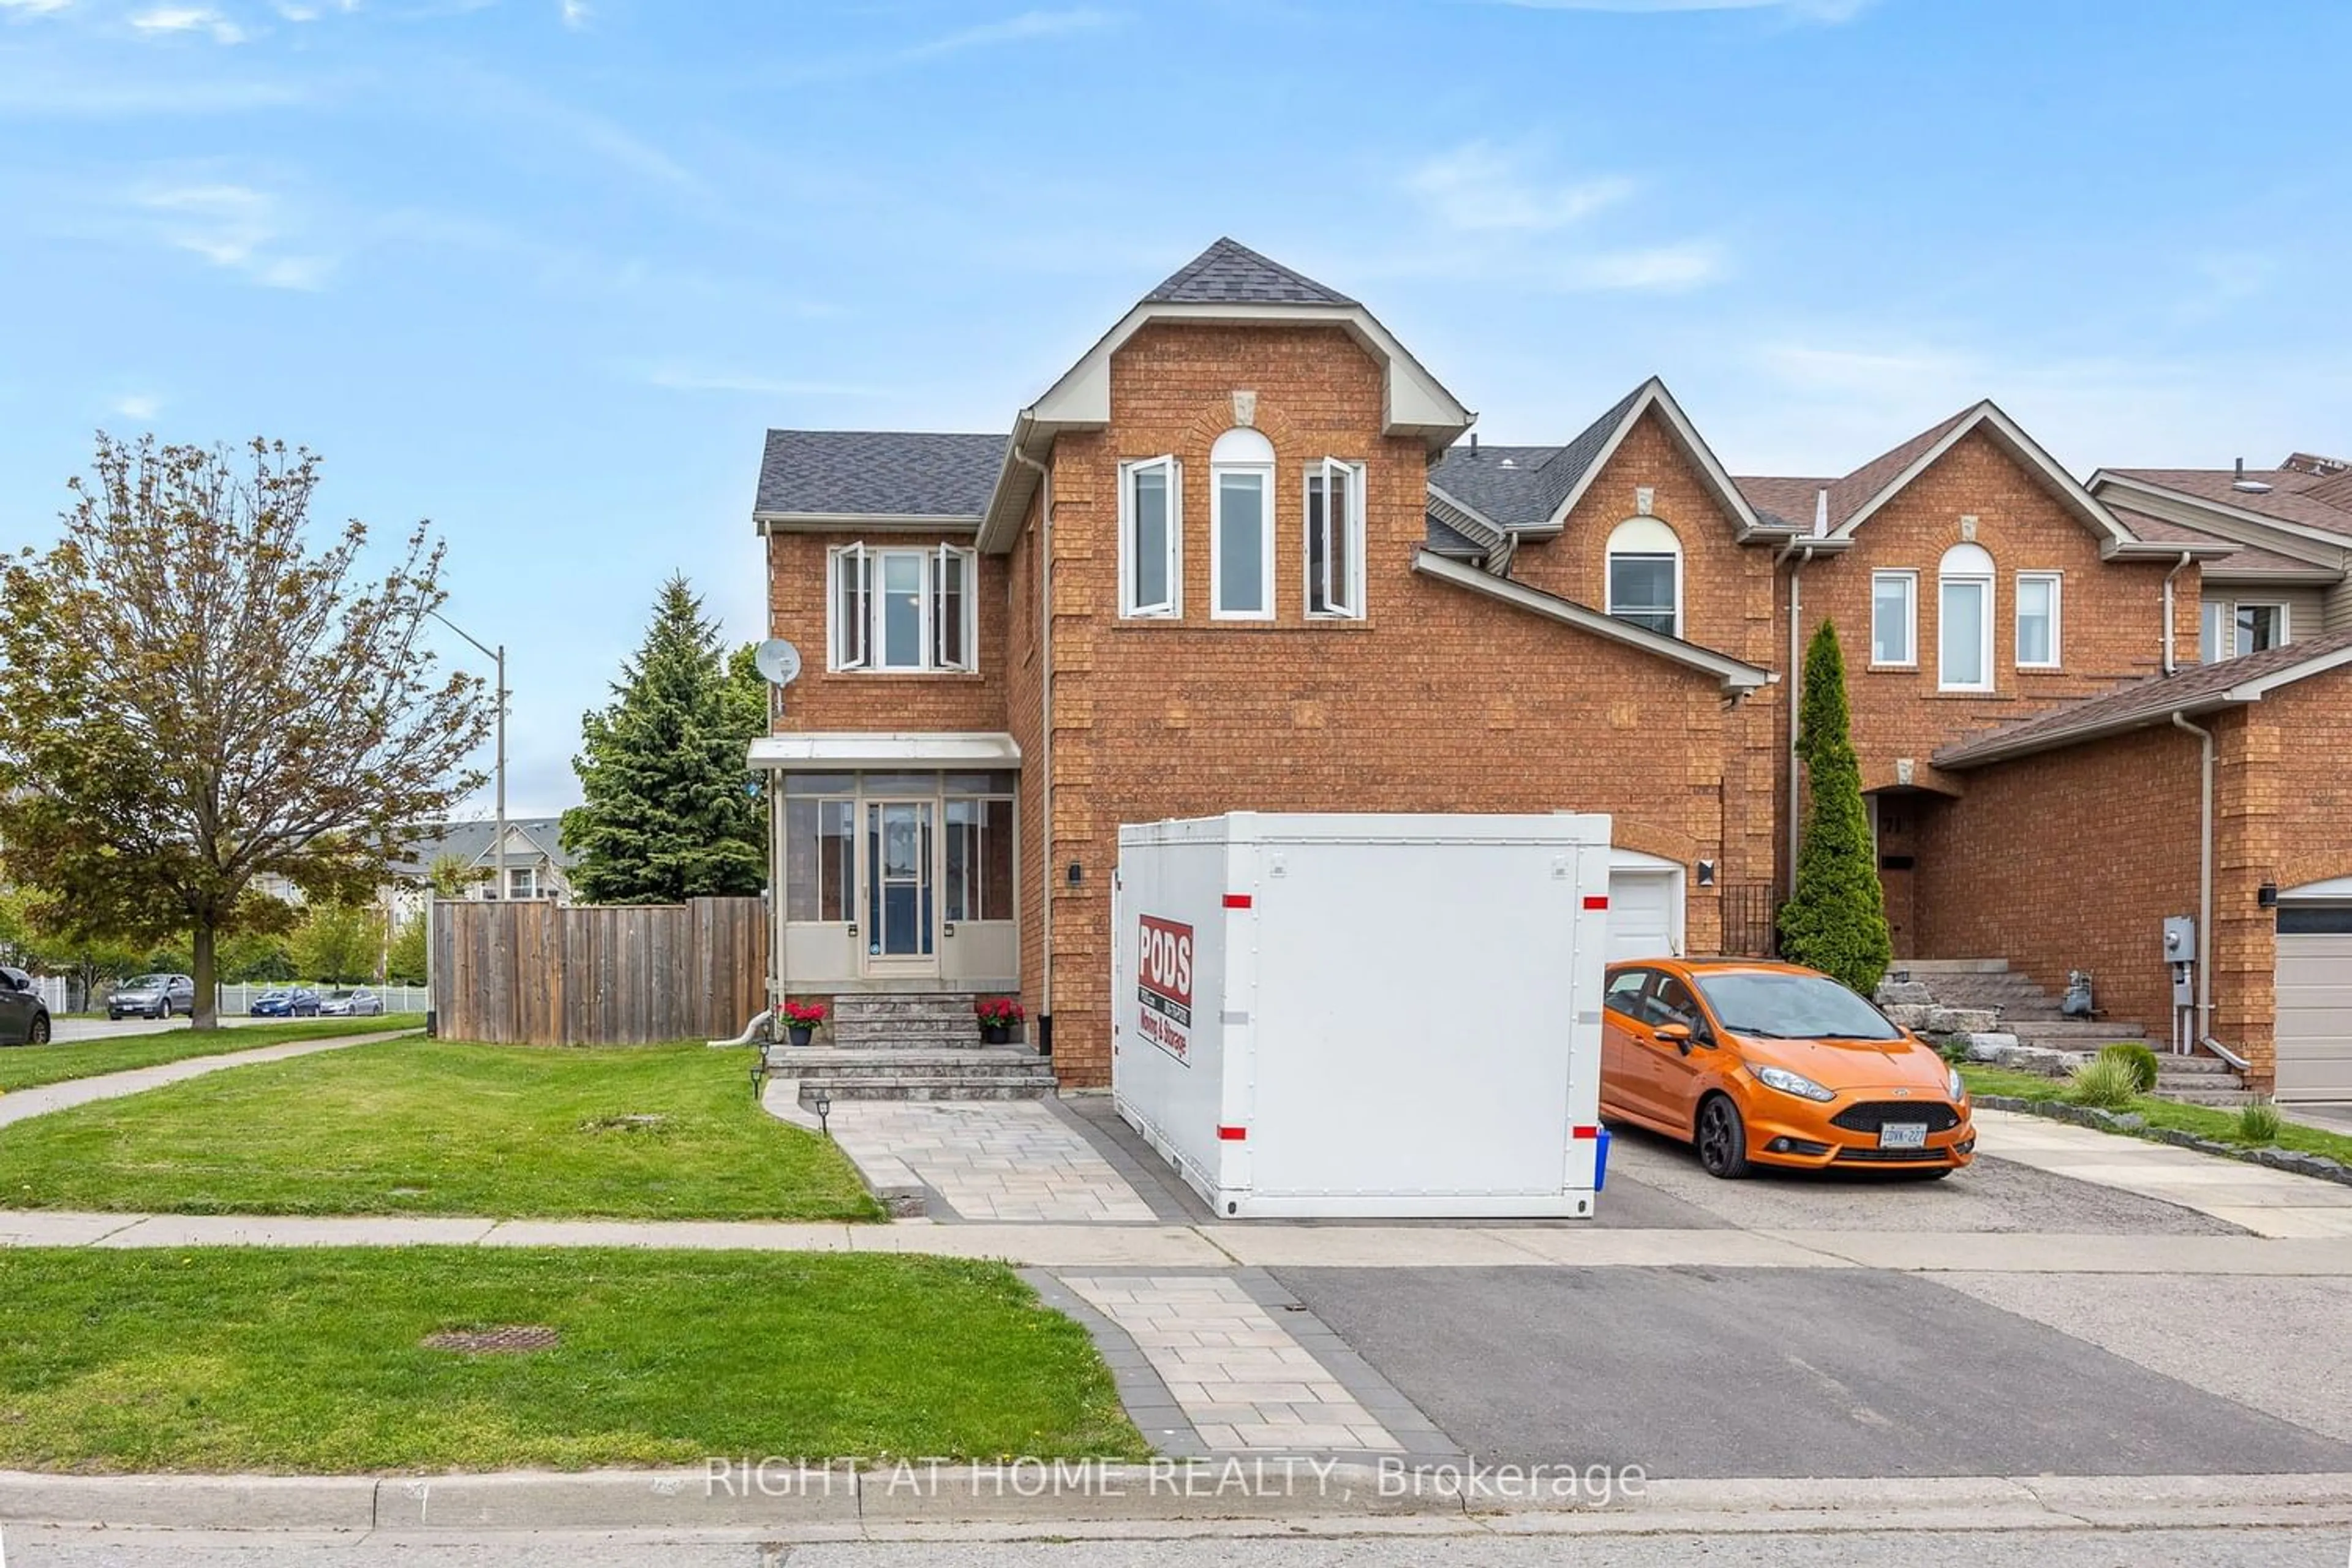 Home with brick exterior material for 75 Landerville Lane, Clarington Ontario L1C 4Y1